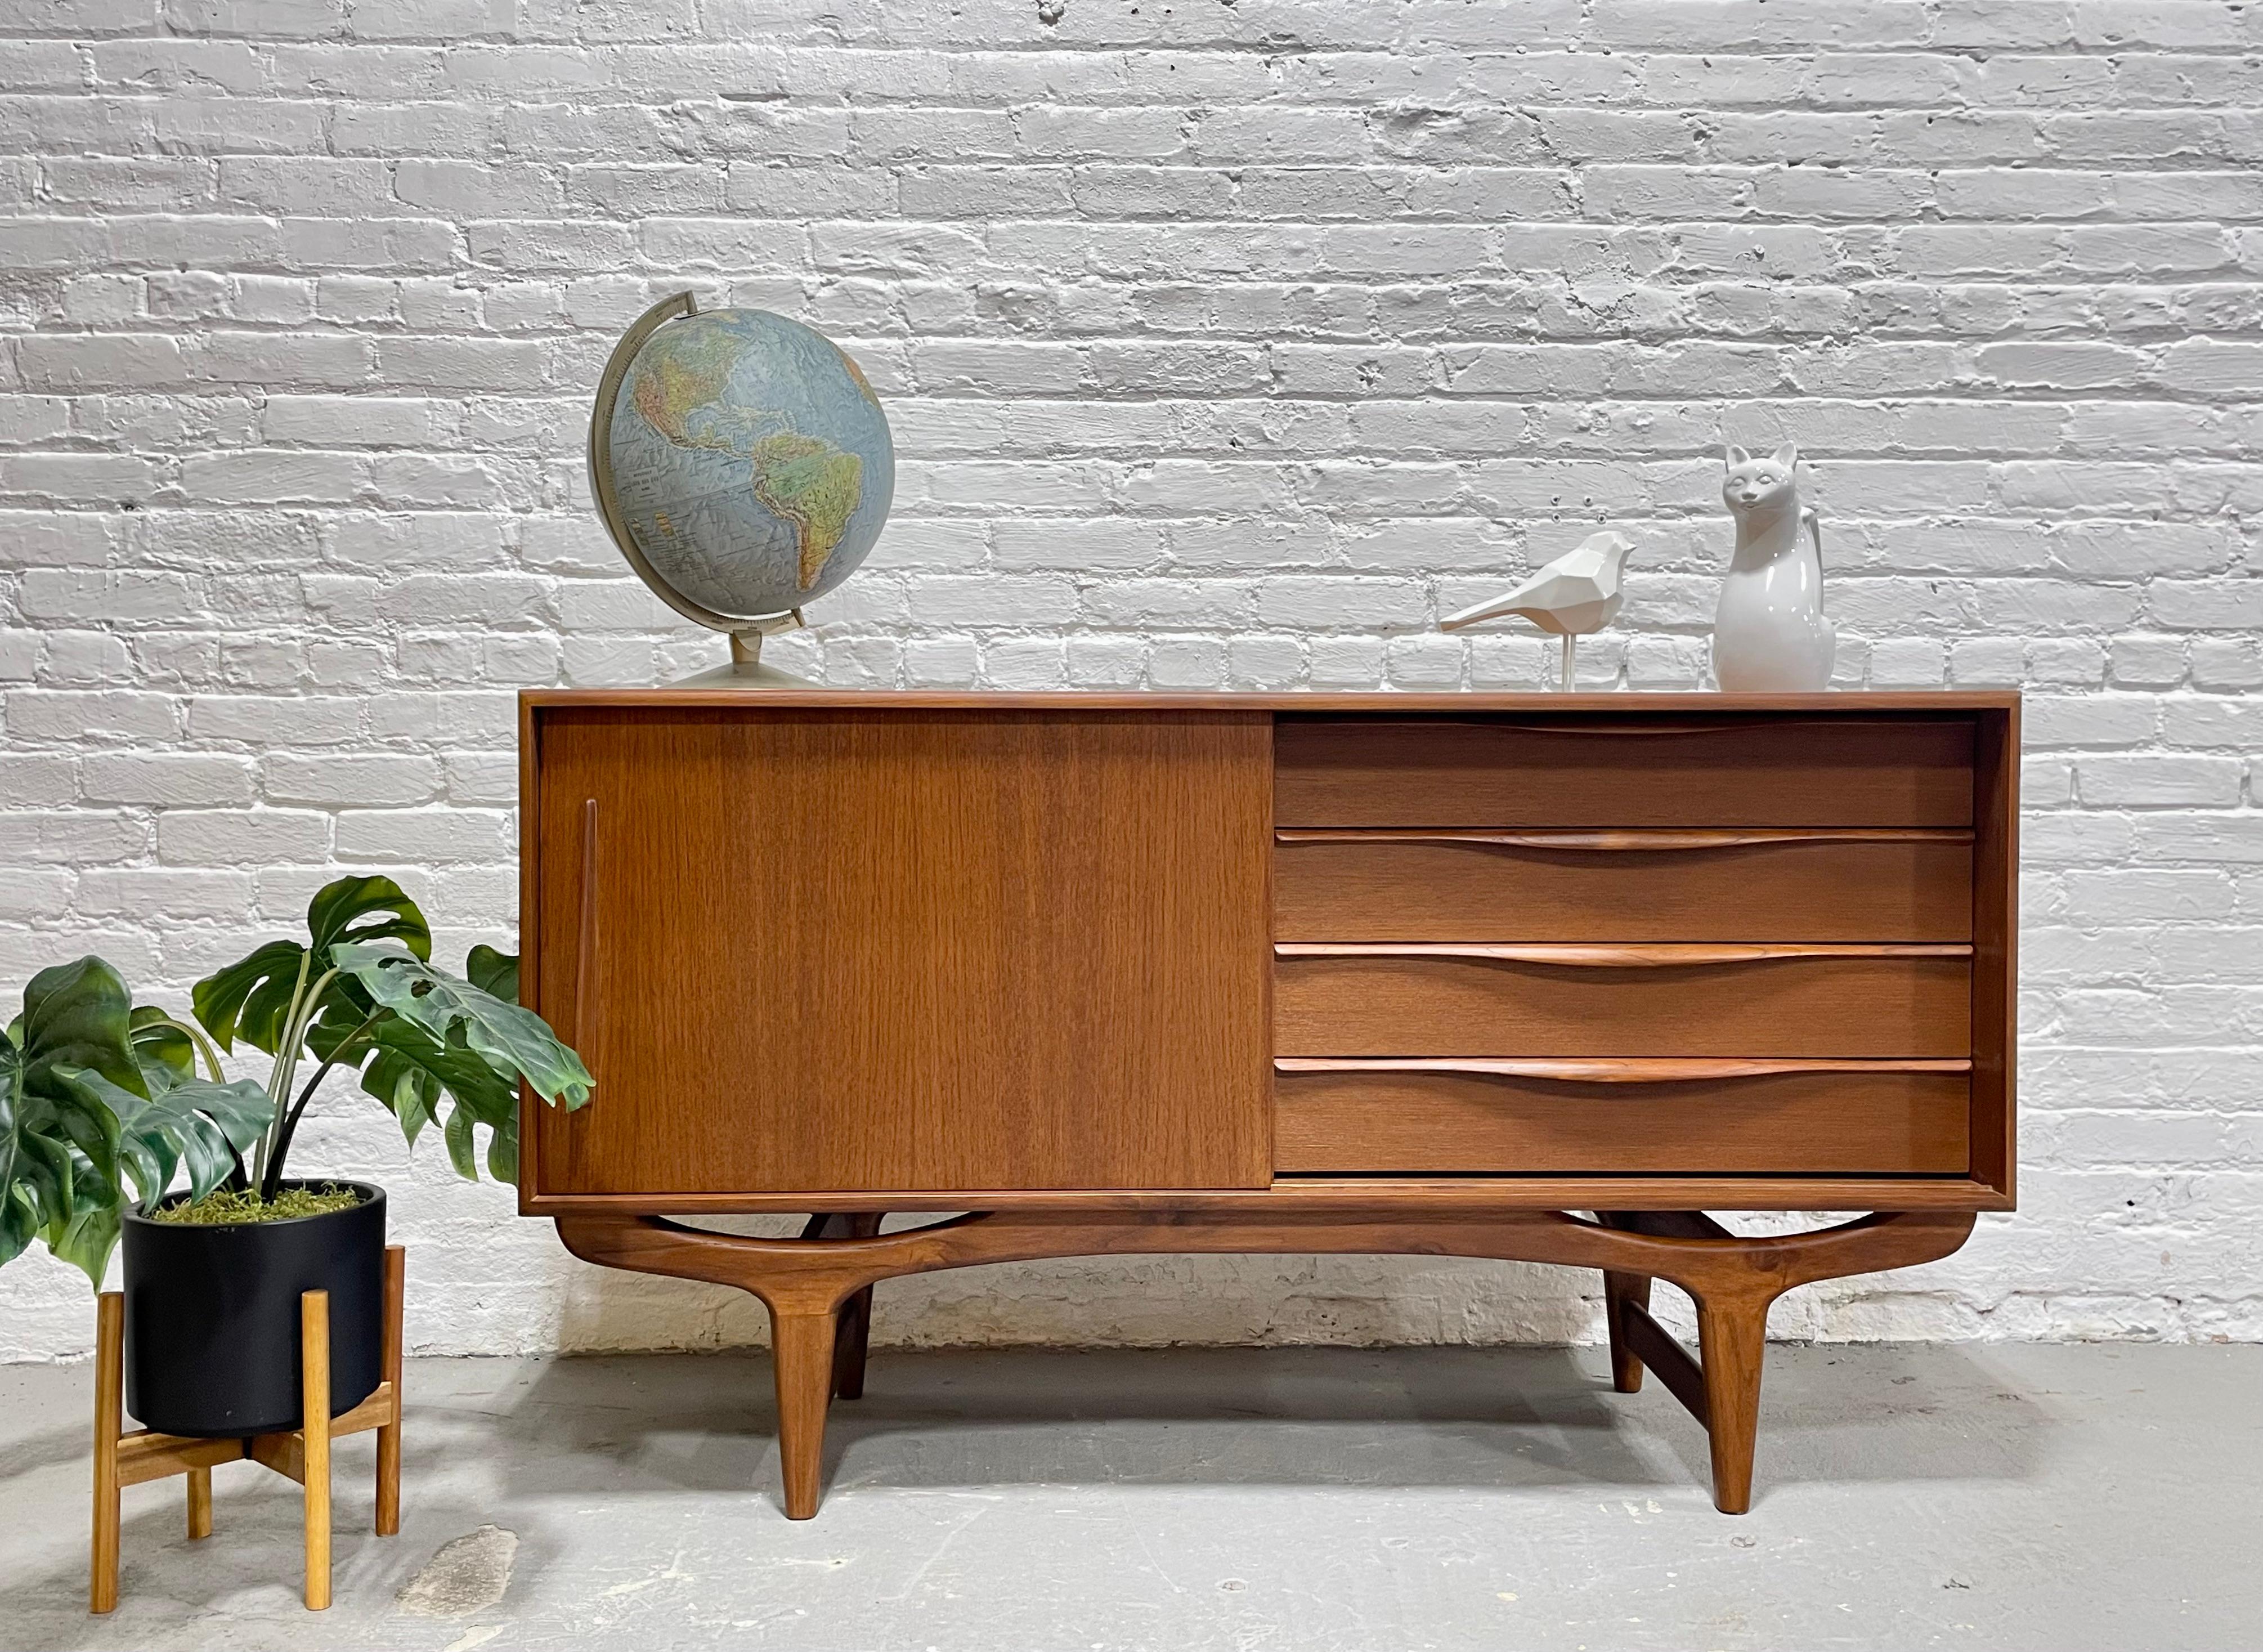 Mid Century Modern styled Handmade Credenza / Media Stand in a perfectly tailored apartment size. This beauty features exquisite sculptural hand pulls and bowtie leg design and is a handmade, newly built piece made from reclaimed teak. Stunning wood